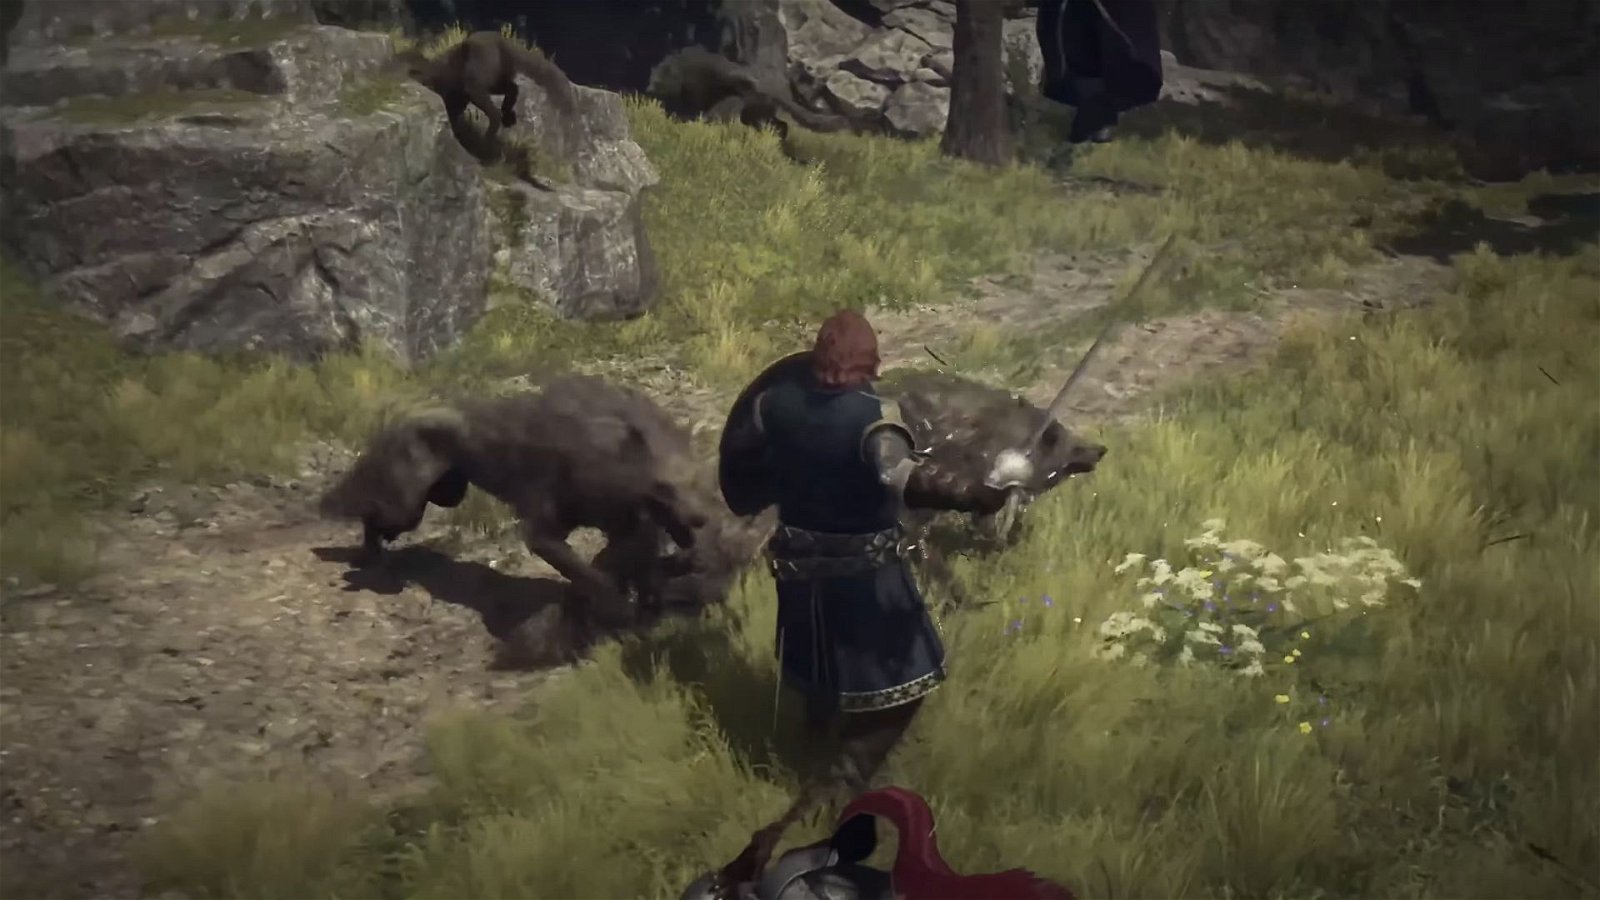 how to increase inventory size dragon's dogma 2